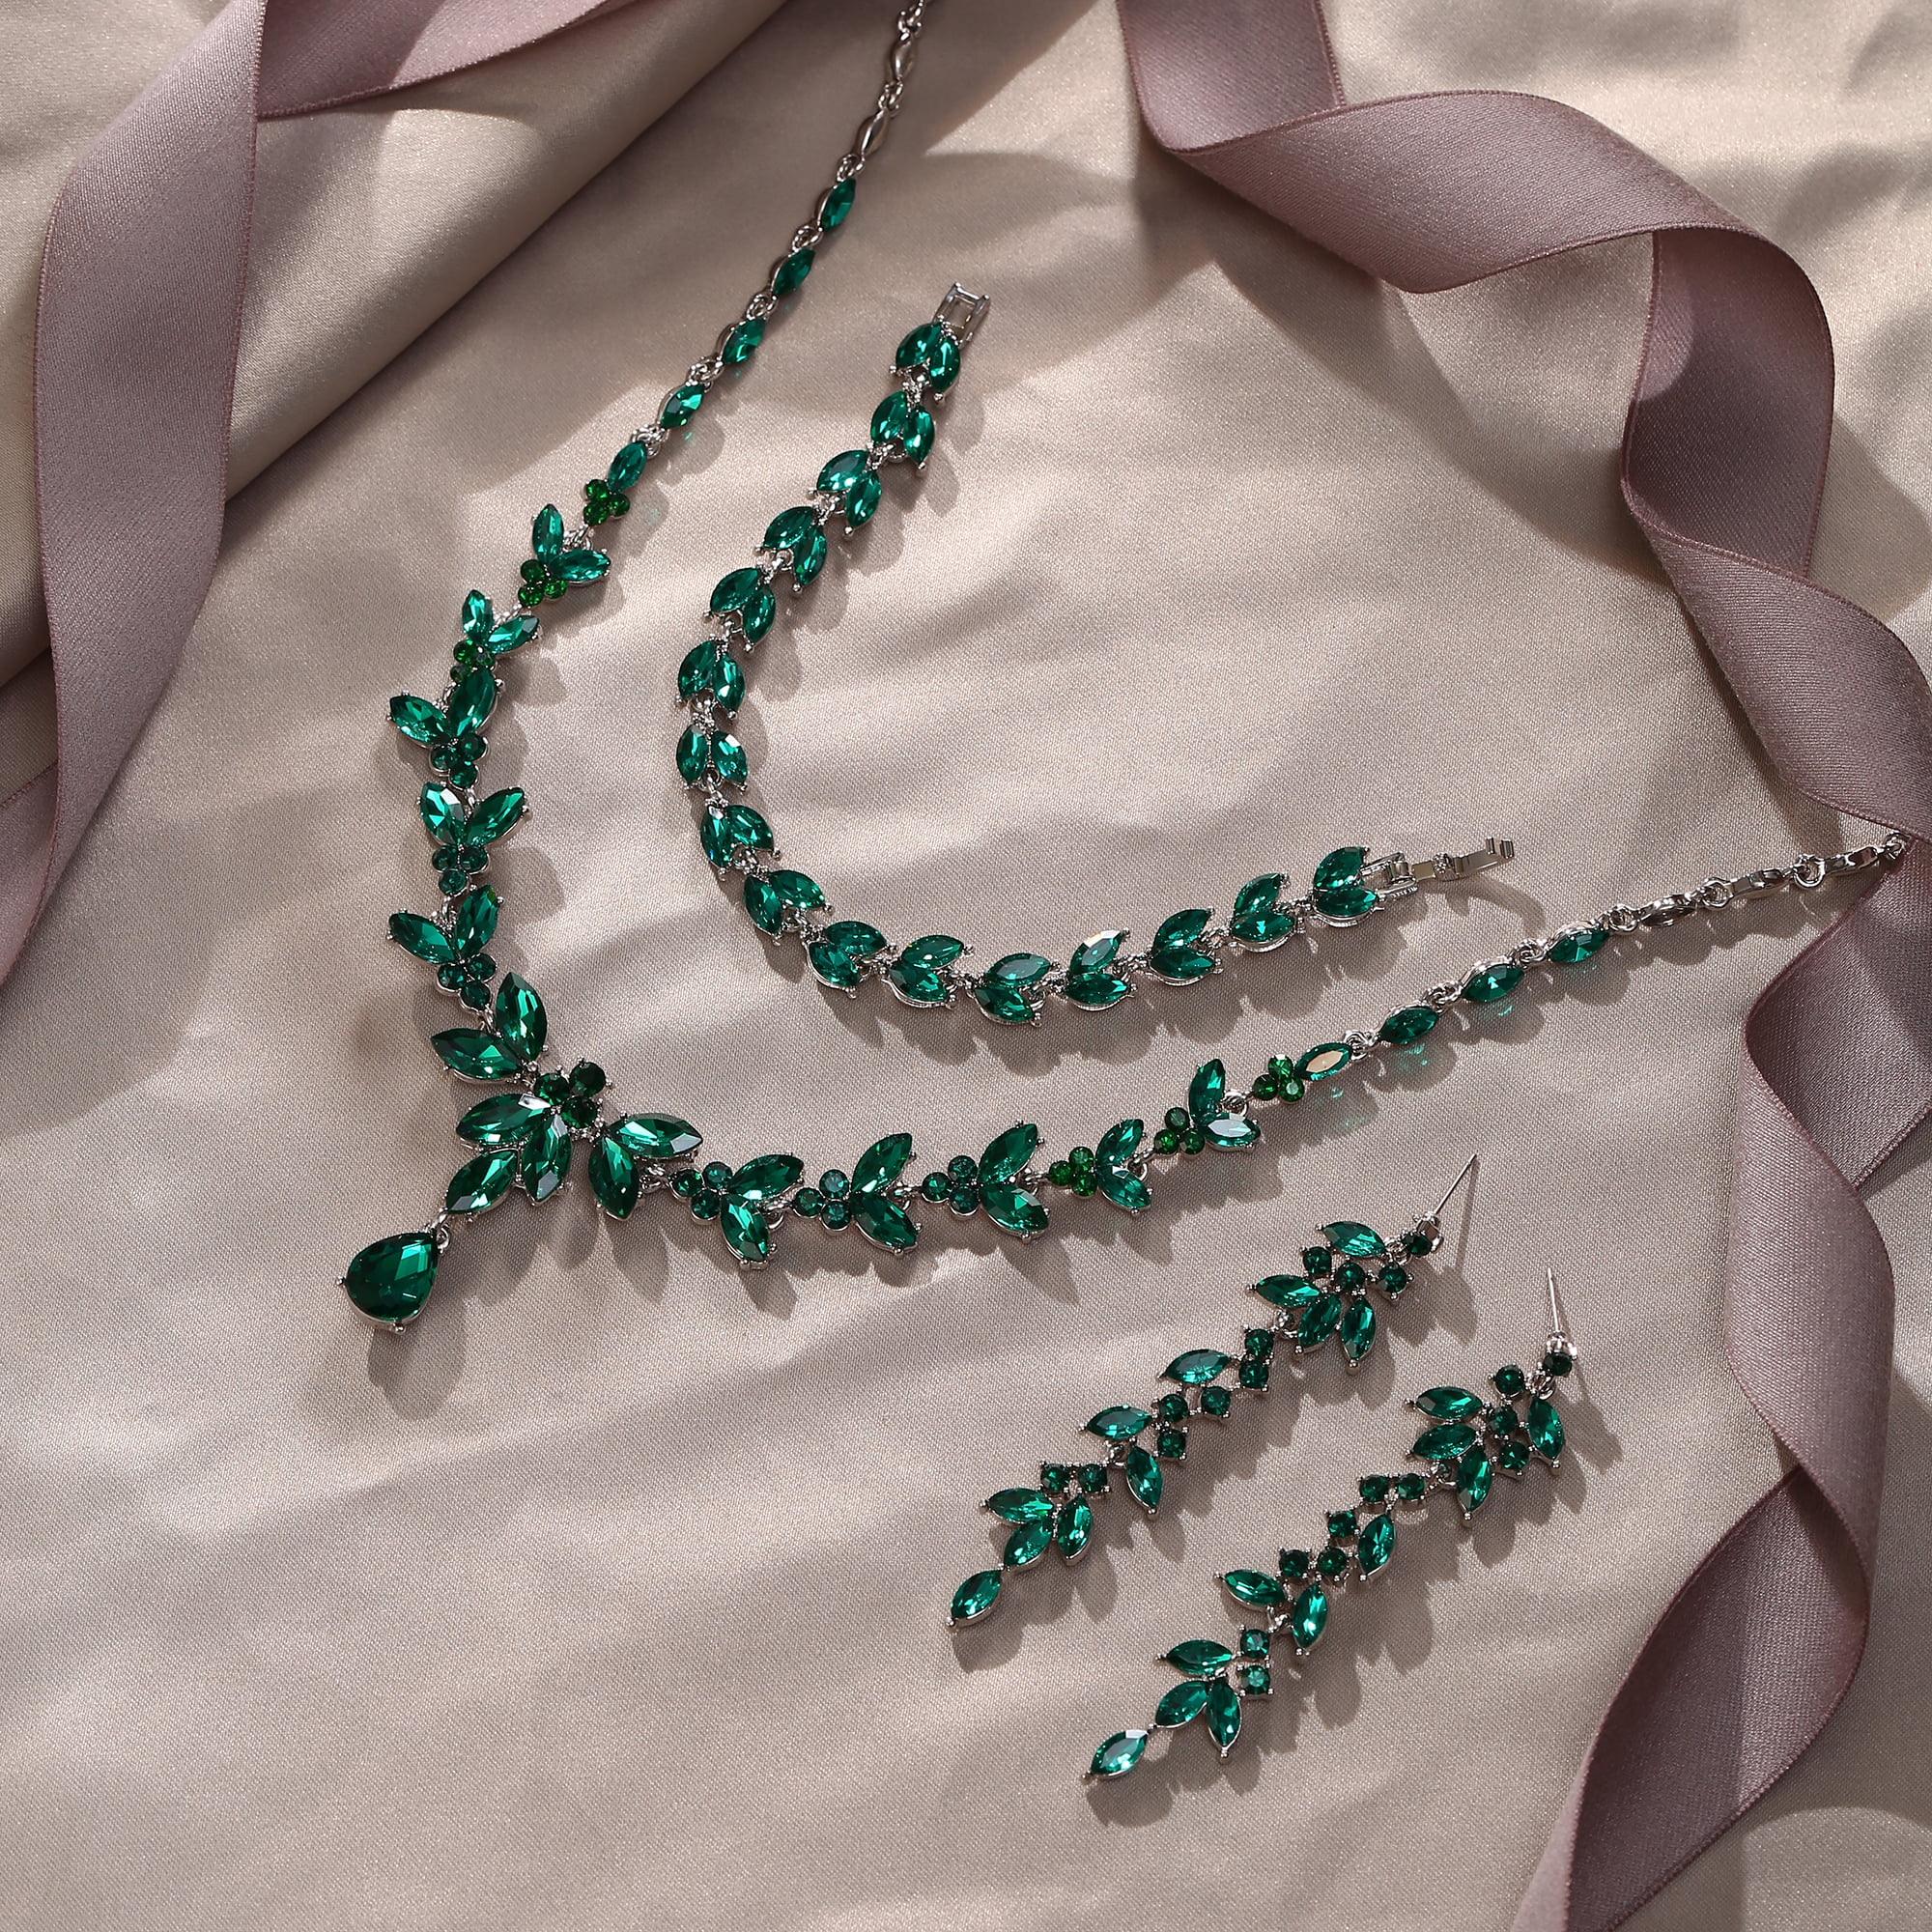 Emerald Green Rhinestone Japanned Necklace - Garden Party Collection  Vintage Jewelry